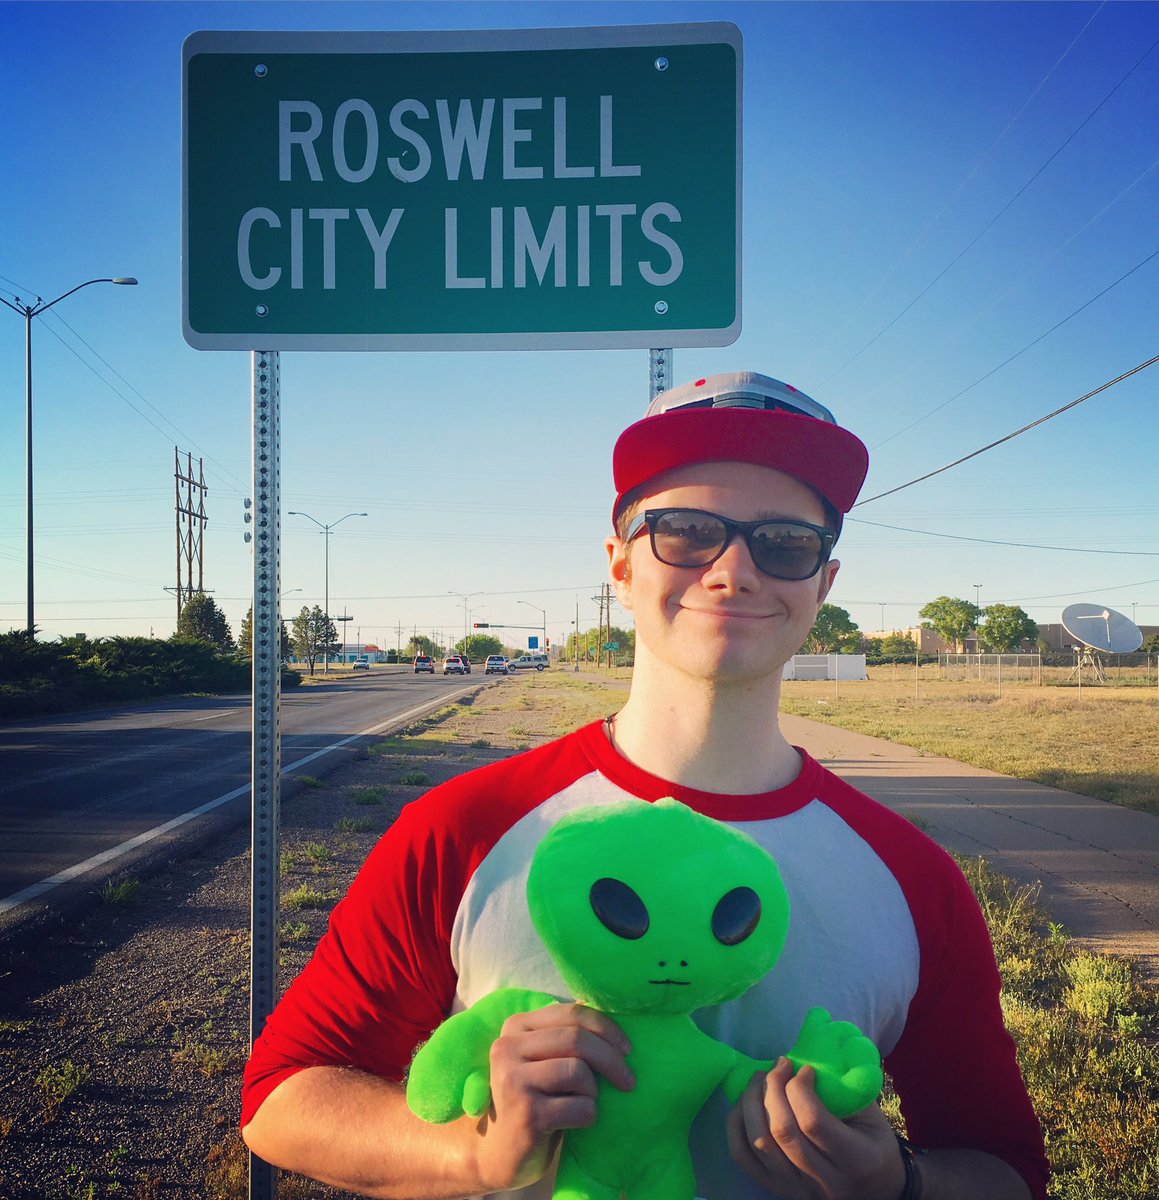 Found one! #Roswell